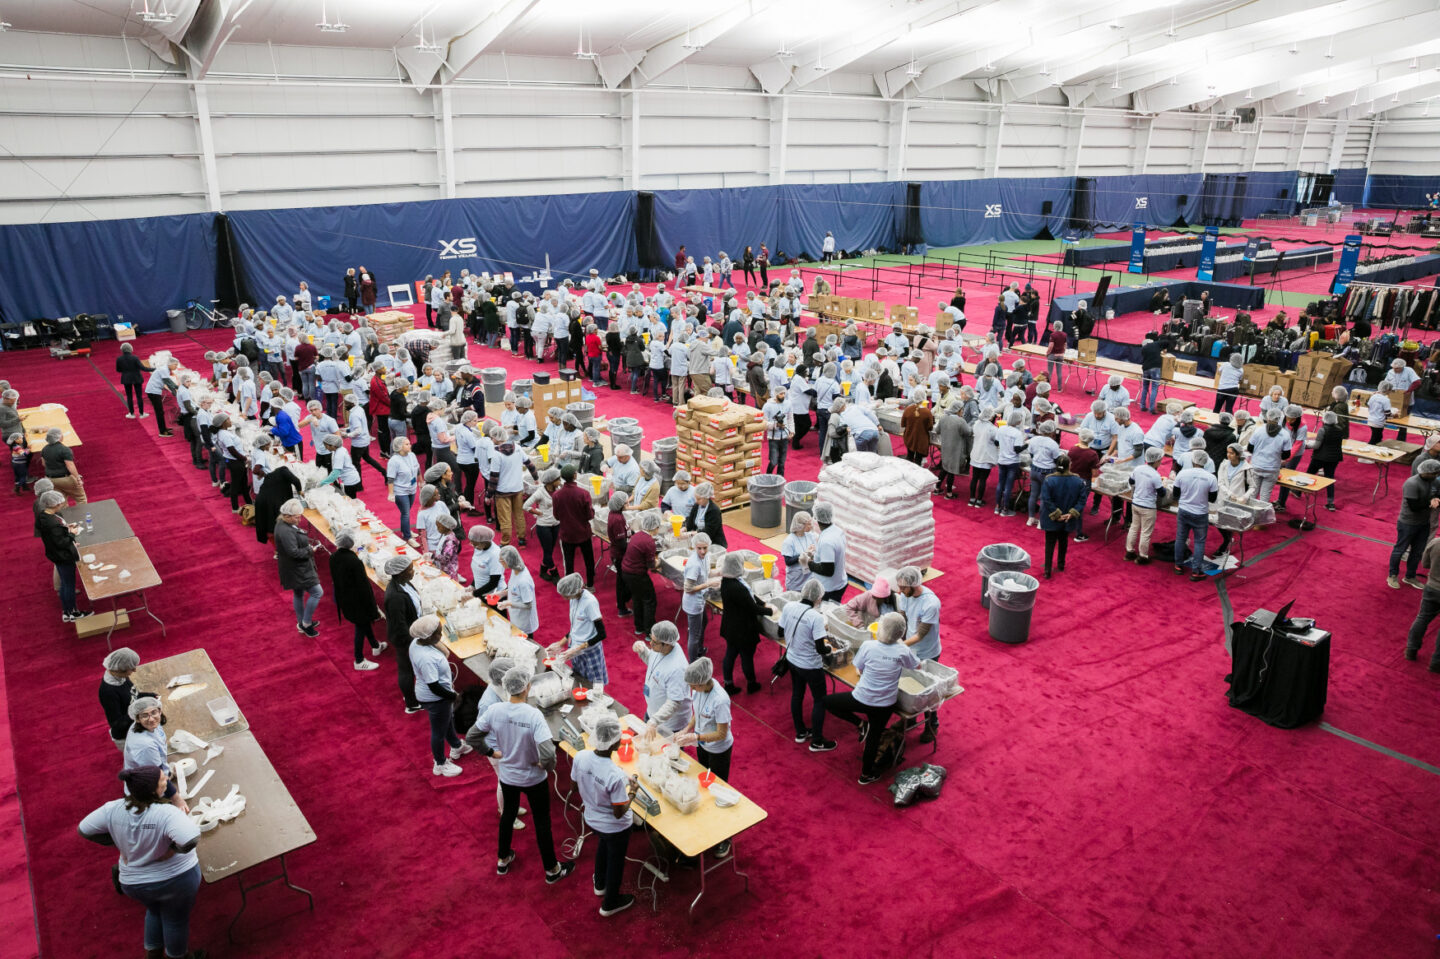 Students and volunteers help pack food during a Day of Action in Chicago